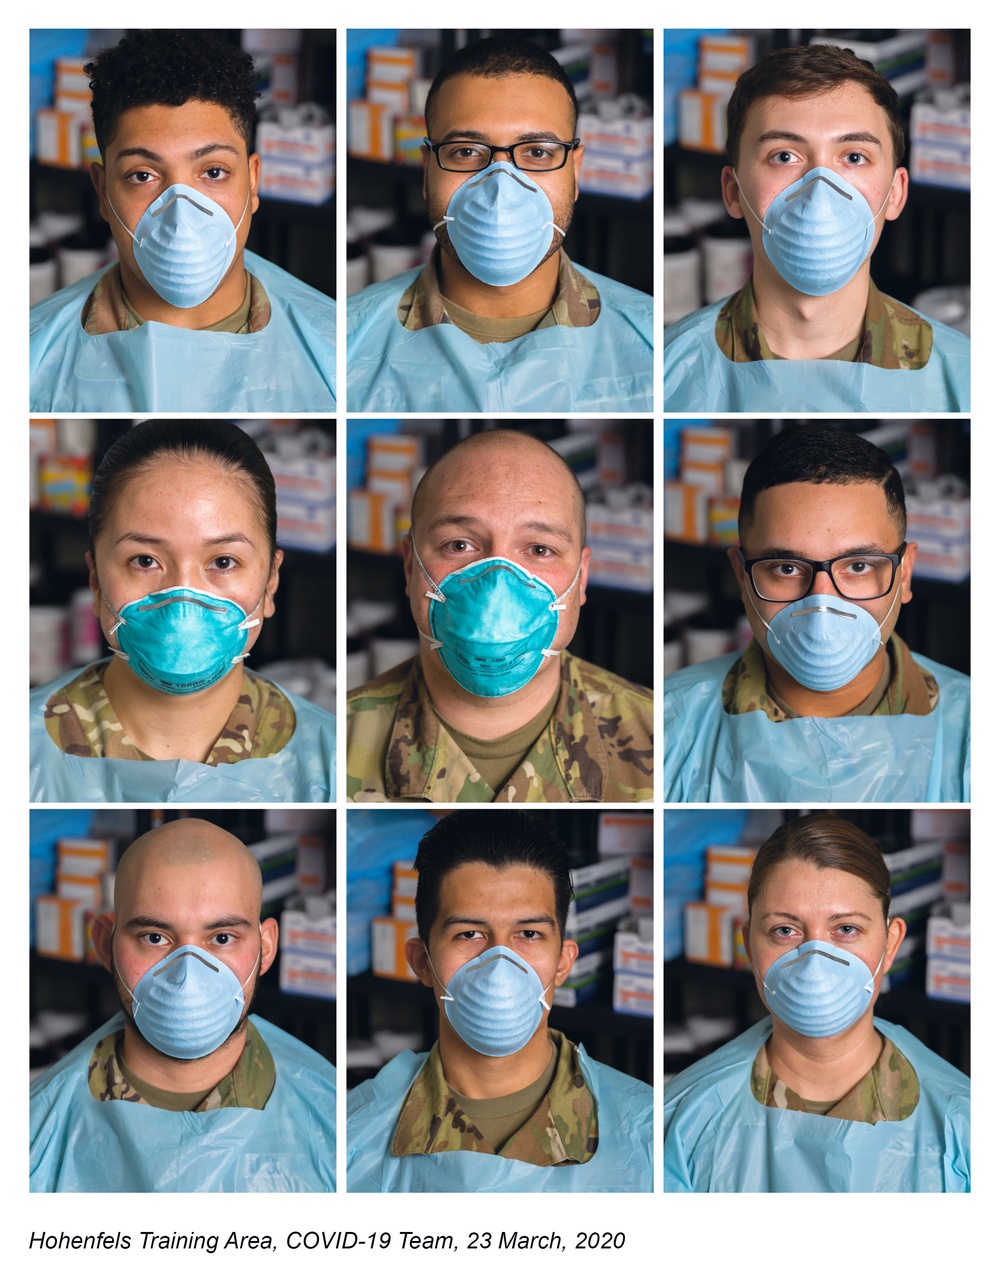 Portraits of Medical Personnel on the front lines of the COVID-19 Pandemic.